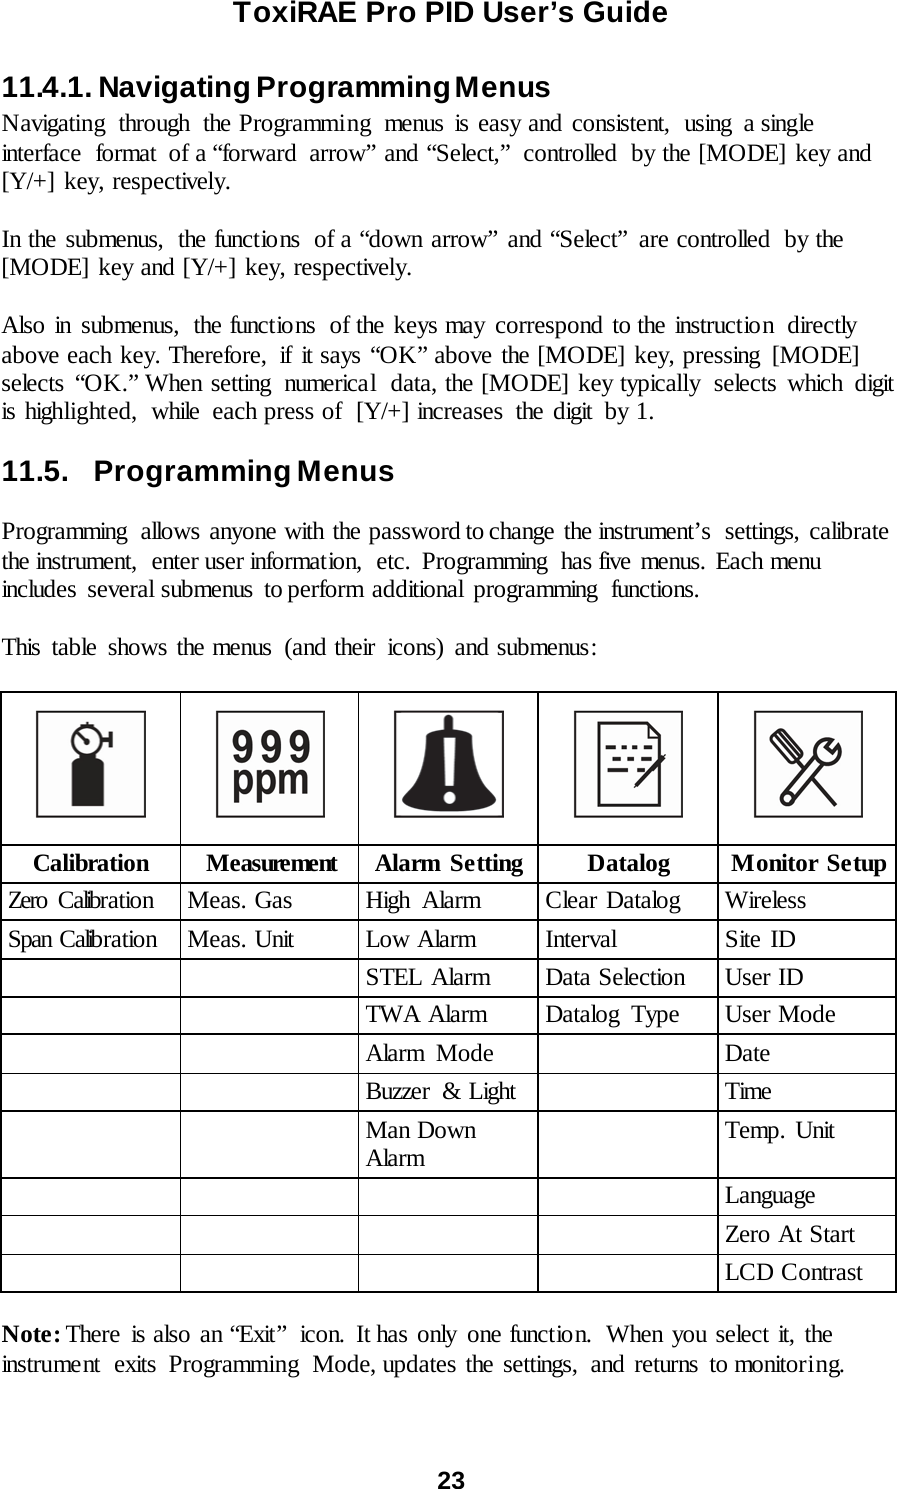 ToxiRAE Pro PID User’s Guide  23   11.4.1. Navigating Programming Menus Navigating through the Programming menus is easy and consistent, using a single interface format of a “forward arrow” and “Select,”  controlled  by the [MODE] key and [Y/+] key, respectively.  In the submenus,  the functions of a “down arrow” and “Select”  are controlled  by the [MODE] key and [Y/+] key, respectively.  Also in submenus, the functions  of the keys may  correspond to the instruction directly above each key. Therefore,  if it says “OK” above the [MODE] key, pressing  [MODE] selects “OK.” When setting  numerical  data, the [MODE] key typically  selects which  digit is highlighted,  while  each press of  [Y/+] increases the digit by 1.  11.5.   Programming Menus  Programming  allows anyone with the password to change the instrument’s  settings, calibrate the instrument,  enter user information,  etc.  Programming  has five menus. Each menu includes several submenus  to perform additional programming  functions.  This table shows the menus (and their  icons) and submenus:             Calibration Measurement Alarm Setting Datalog Monitor Setup Zero Calibr a tio n Meas. Gas High Alarm Clear Datalog Wireless Span Calib ra tio n Meas. Unit Low Alarm Interval Site ID   STEL Alarm Data Selection User ID   TWA Alarm Datalog Type User Mode   Alarm Mode  Date   Buzzer  &amp; Light  Time   Man Down Alarm  Temp. Unit     Language     Zero At Start     LCD Contrast  Note: There is also an “Exit”  icon. It has only one function.  When you select it, the instrument  exits Programming  Mode, updates the settings, and returns to monitoring.  